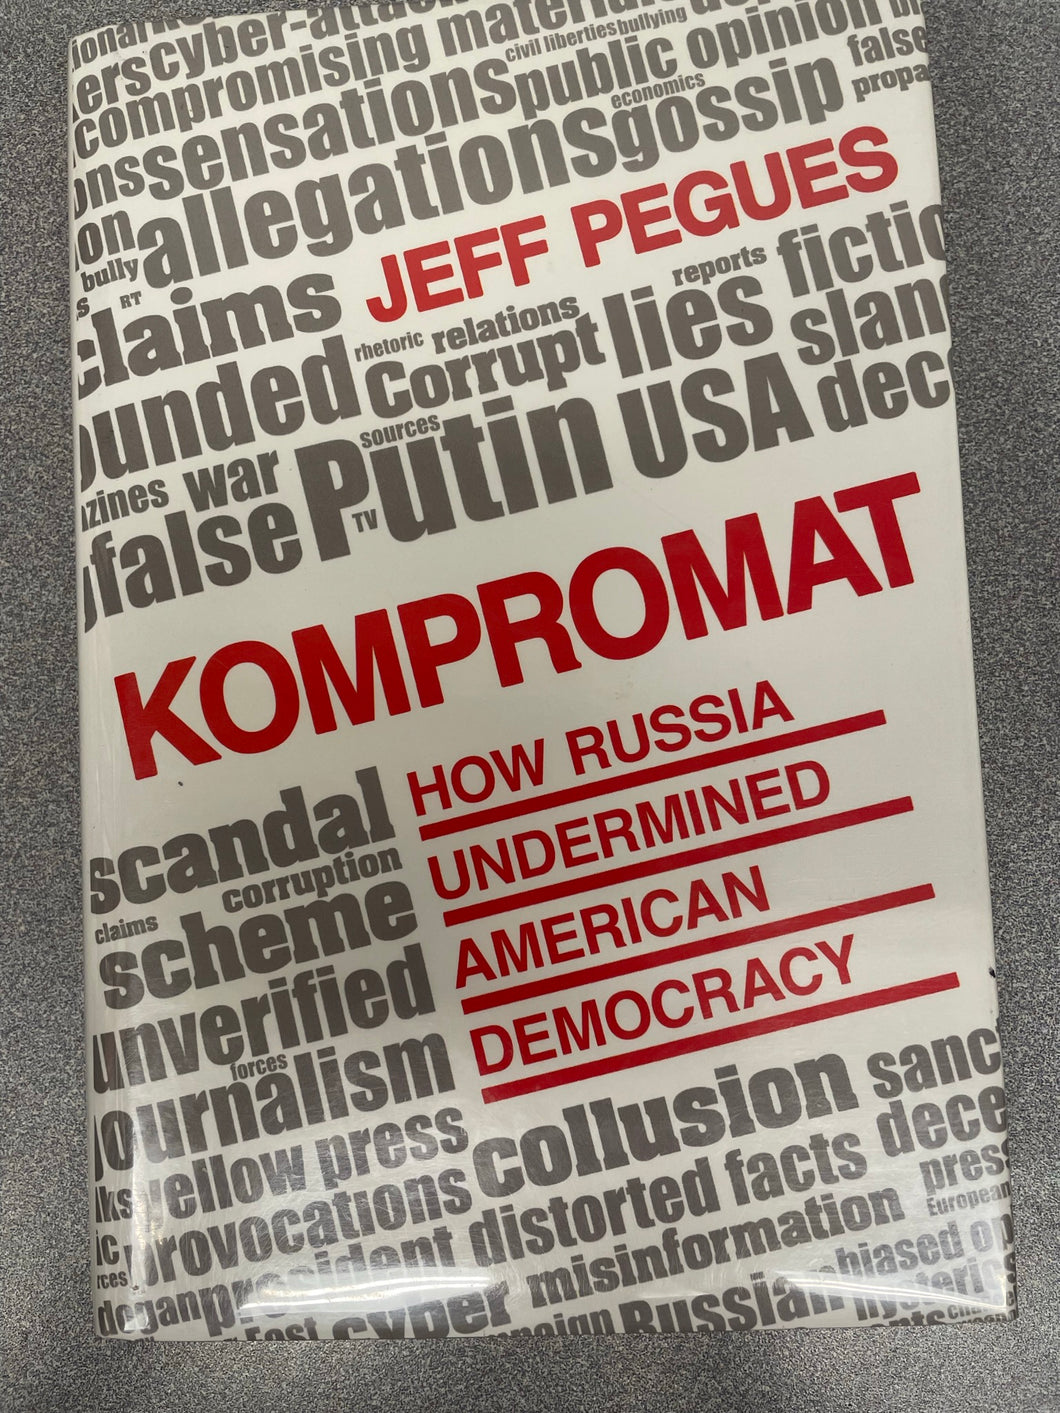 Kompromat: How Russia Undermined American Democracy, Pegues, Jeff [2018]  AN 8/23